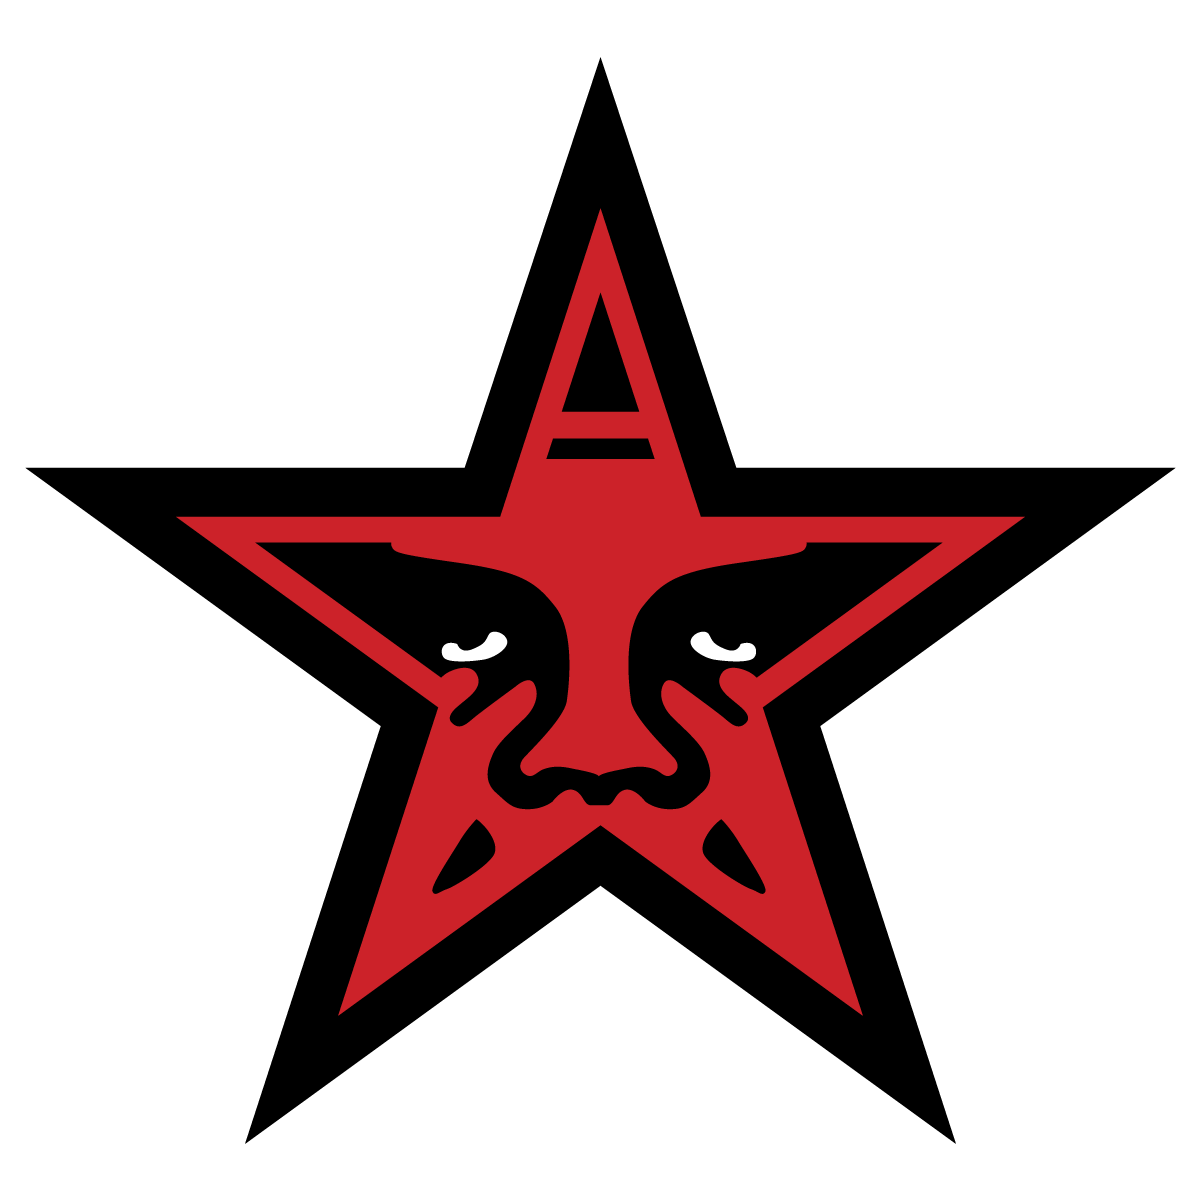 Obey GFX Logo - Obey Giant Star Red Logo Vector | Free Vector Silhouette Graphics AI ...